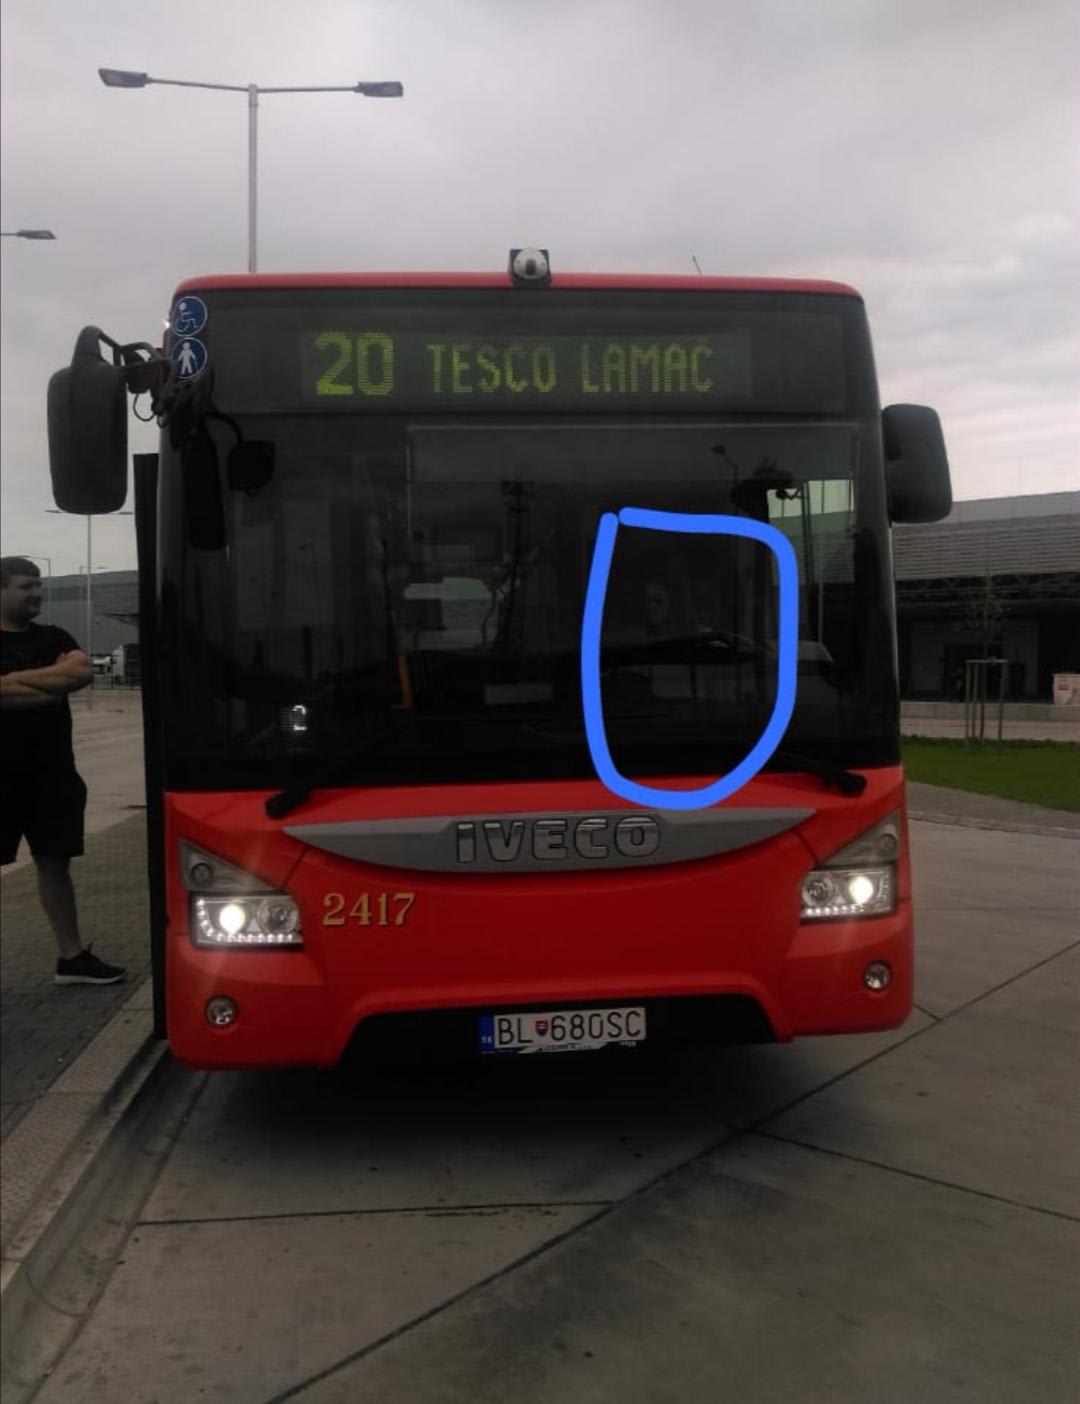 I took this photo last year when I was visiting my dad in work..he is a bus driver. As U can see there is a guy standing outside and next to him in bus is my father. I took a pic of the bus casually and when I looked at the pic I saw this...I don't know what to think, there were no one else with us.